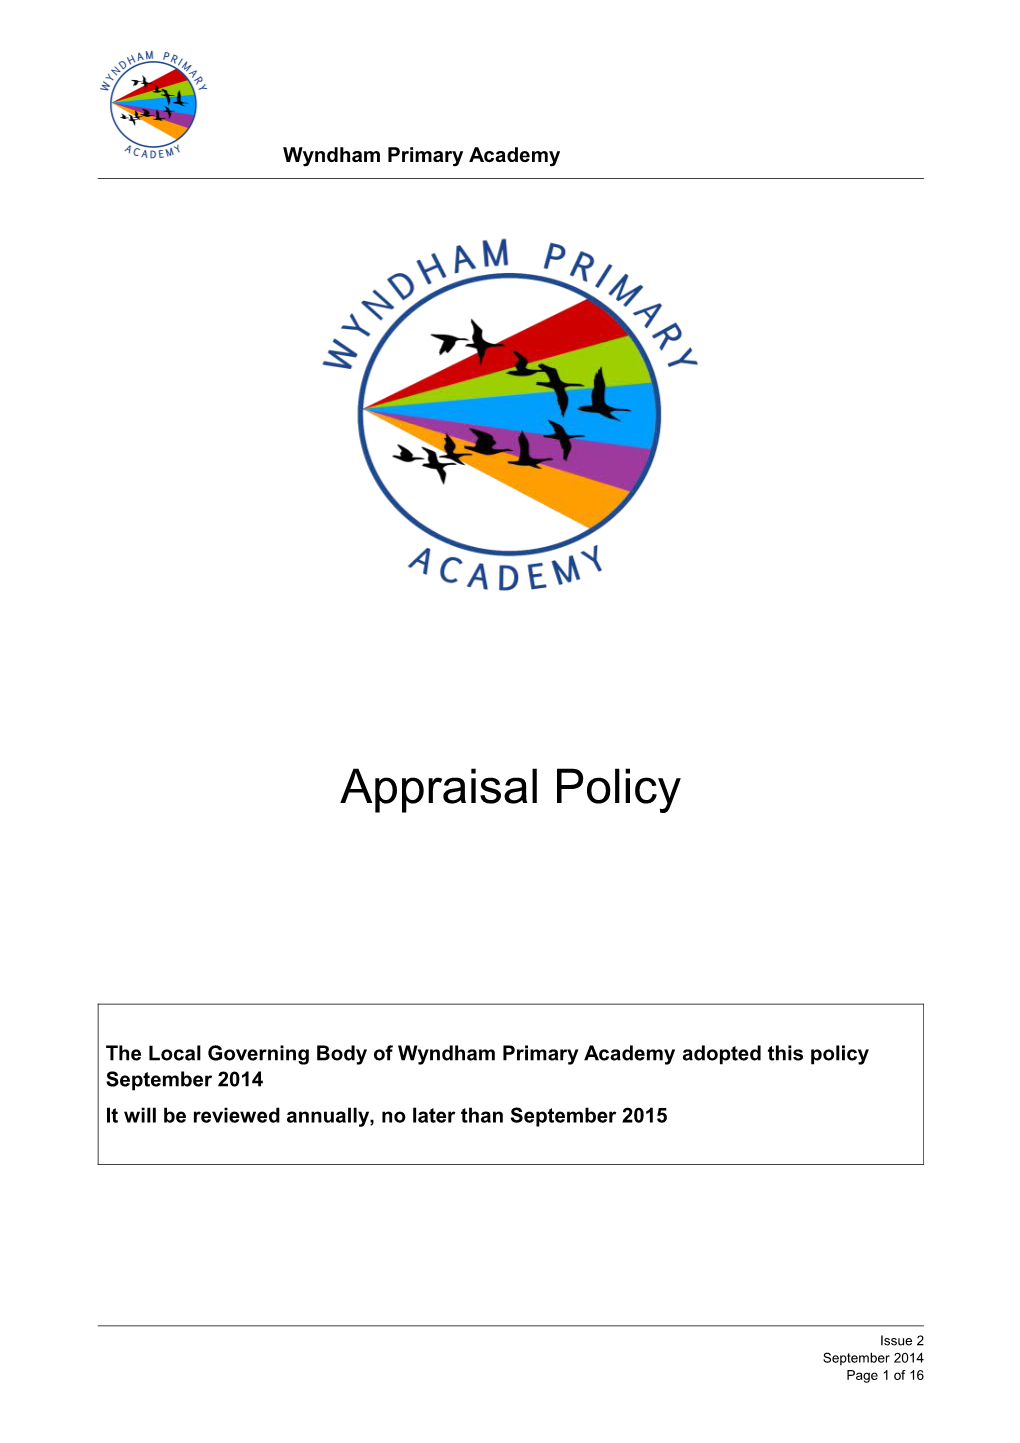 The Local Governing Body of Wyndham Primary Academyadopted This Policy September 2014